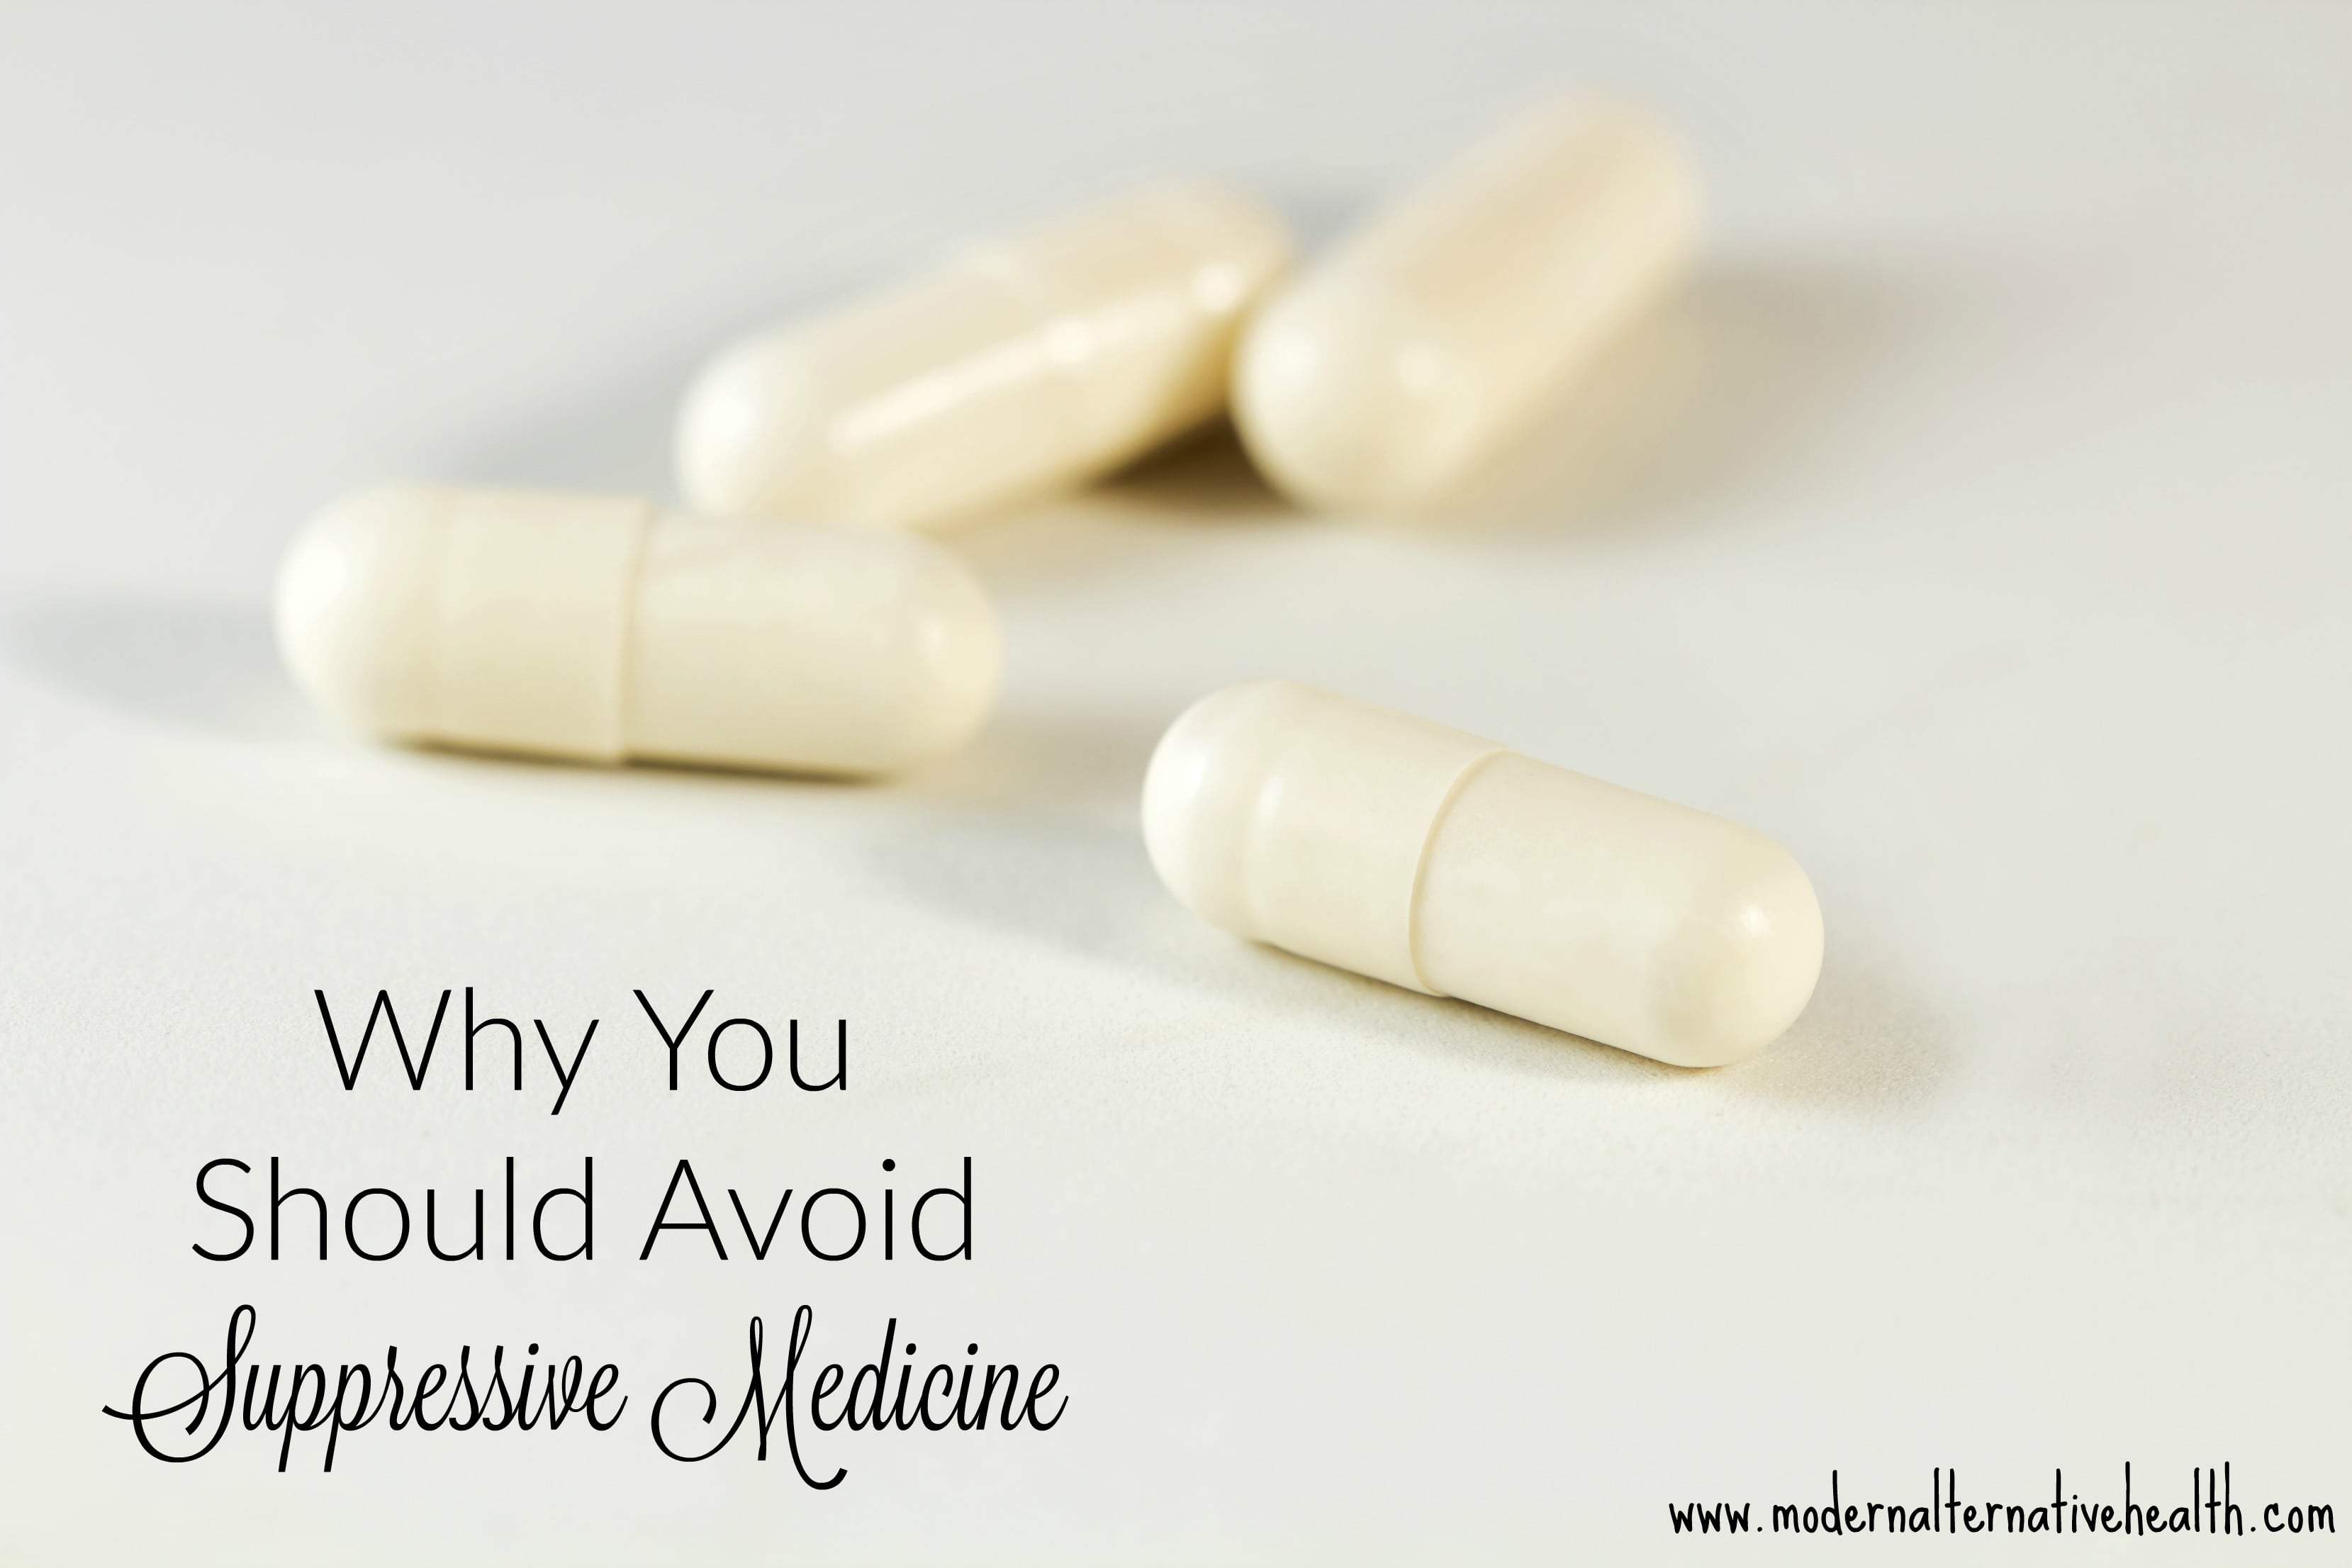 Why You Should Avoid Suppressive Medicine